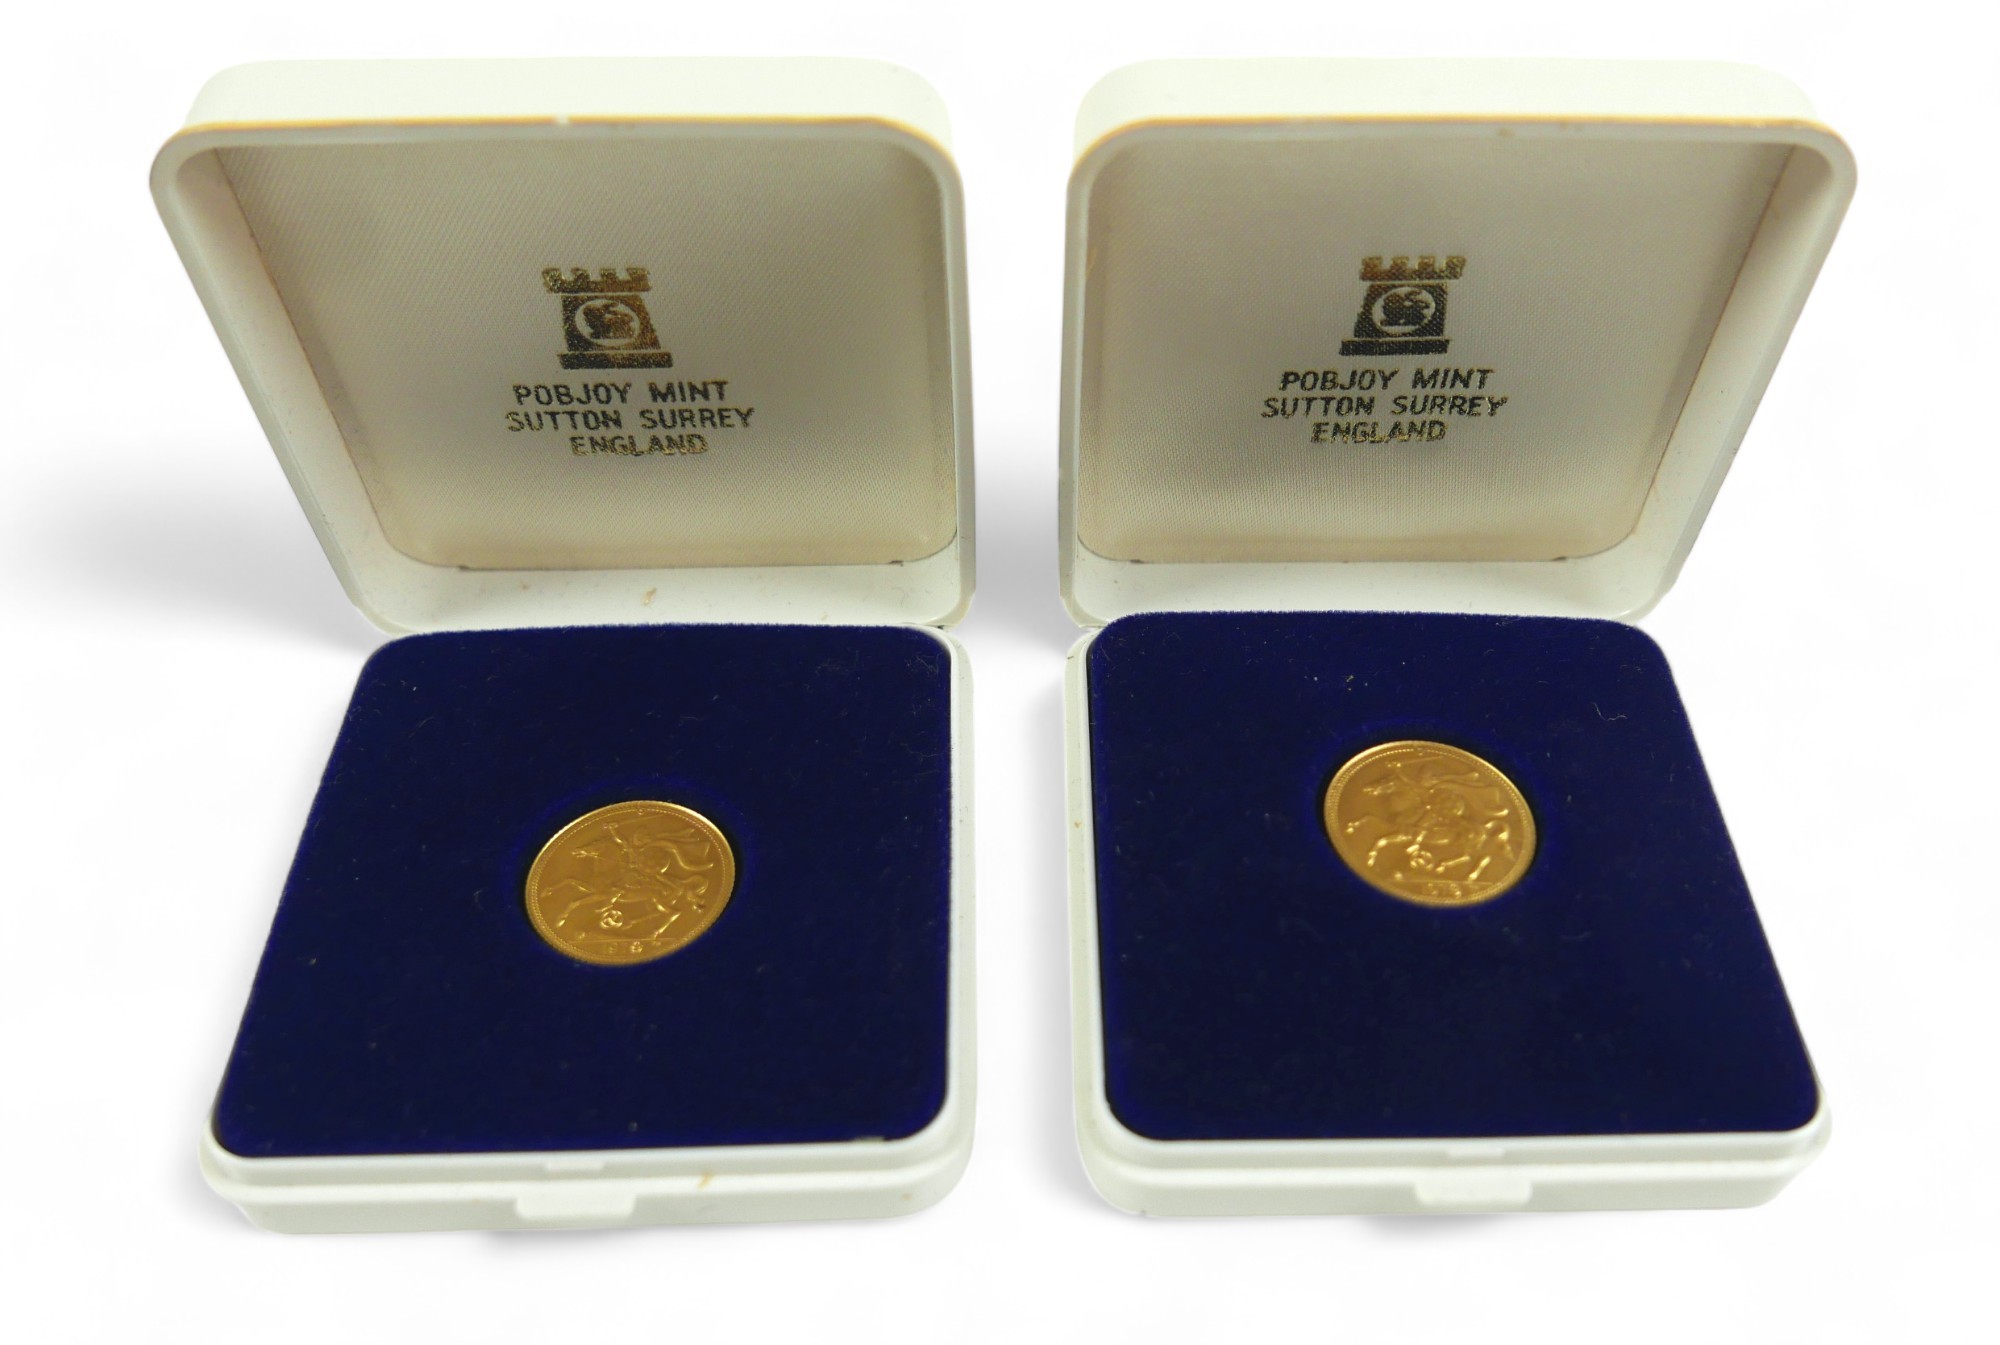 Two 1979 22ct gold coins by Isle of Man treasury for Pobjoy Mint, each weighing 4.3g, both boxed - Image 3 of 4